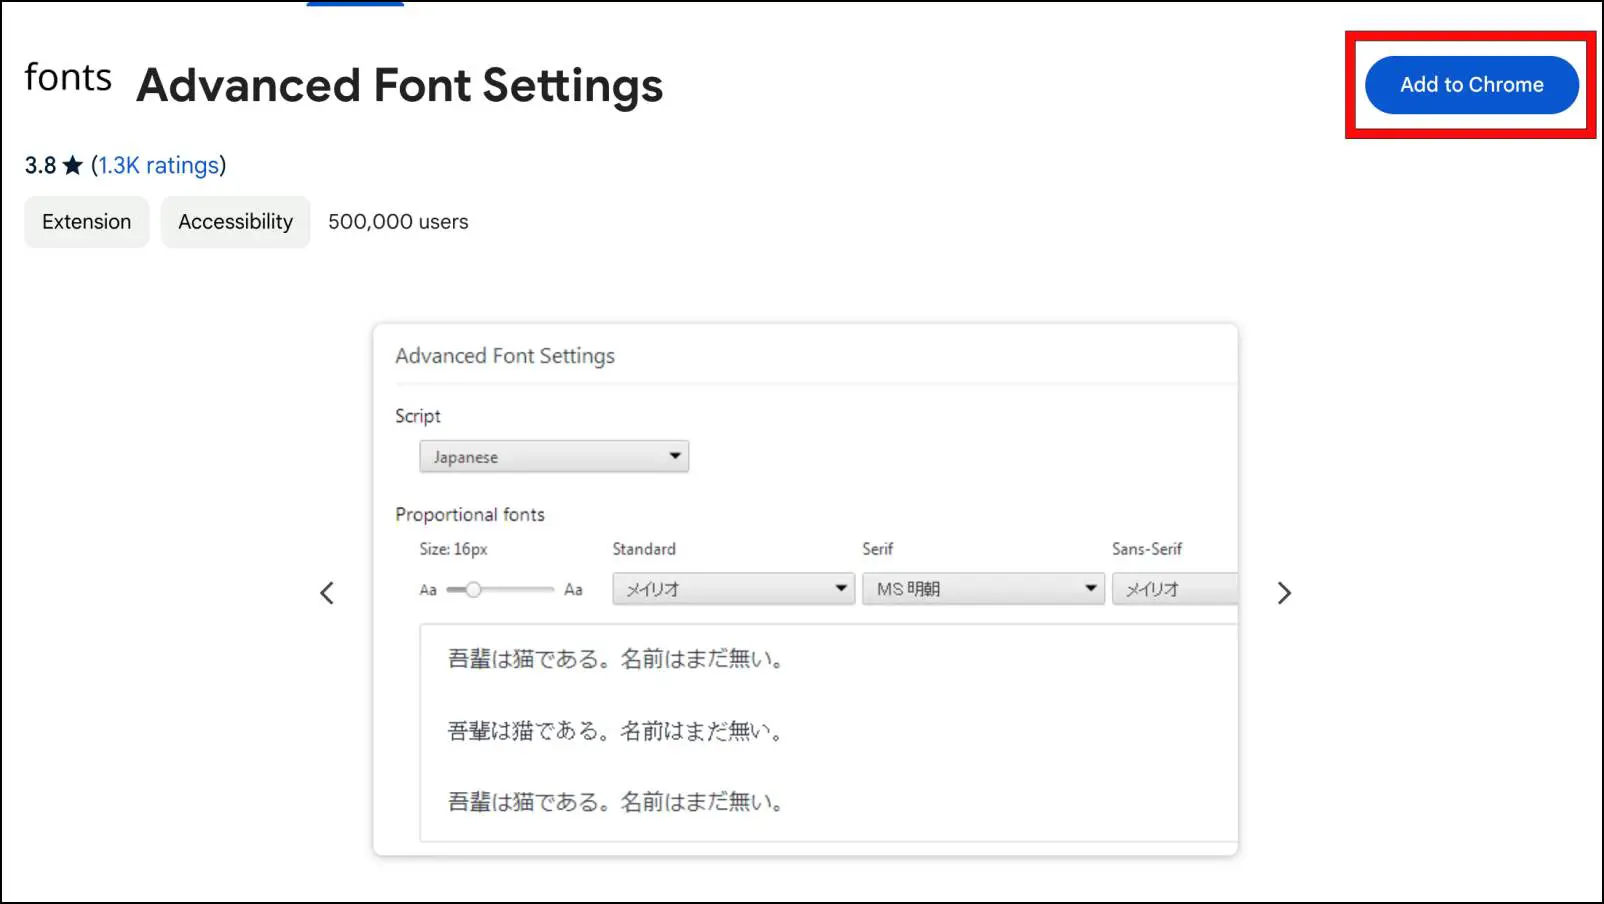 Download the Advanced Font Settings Extension to Chrome